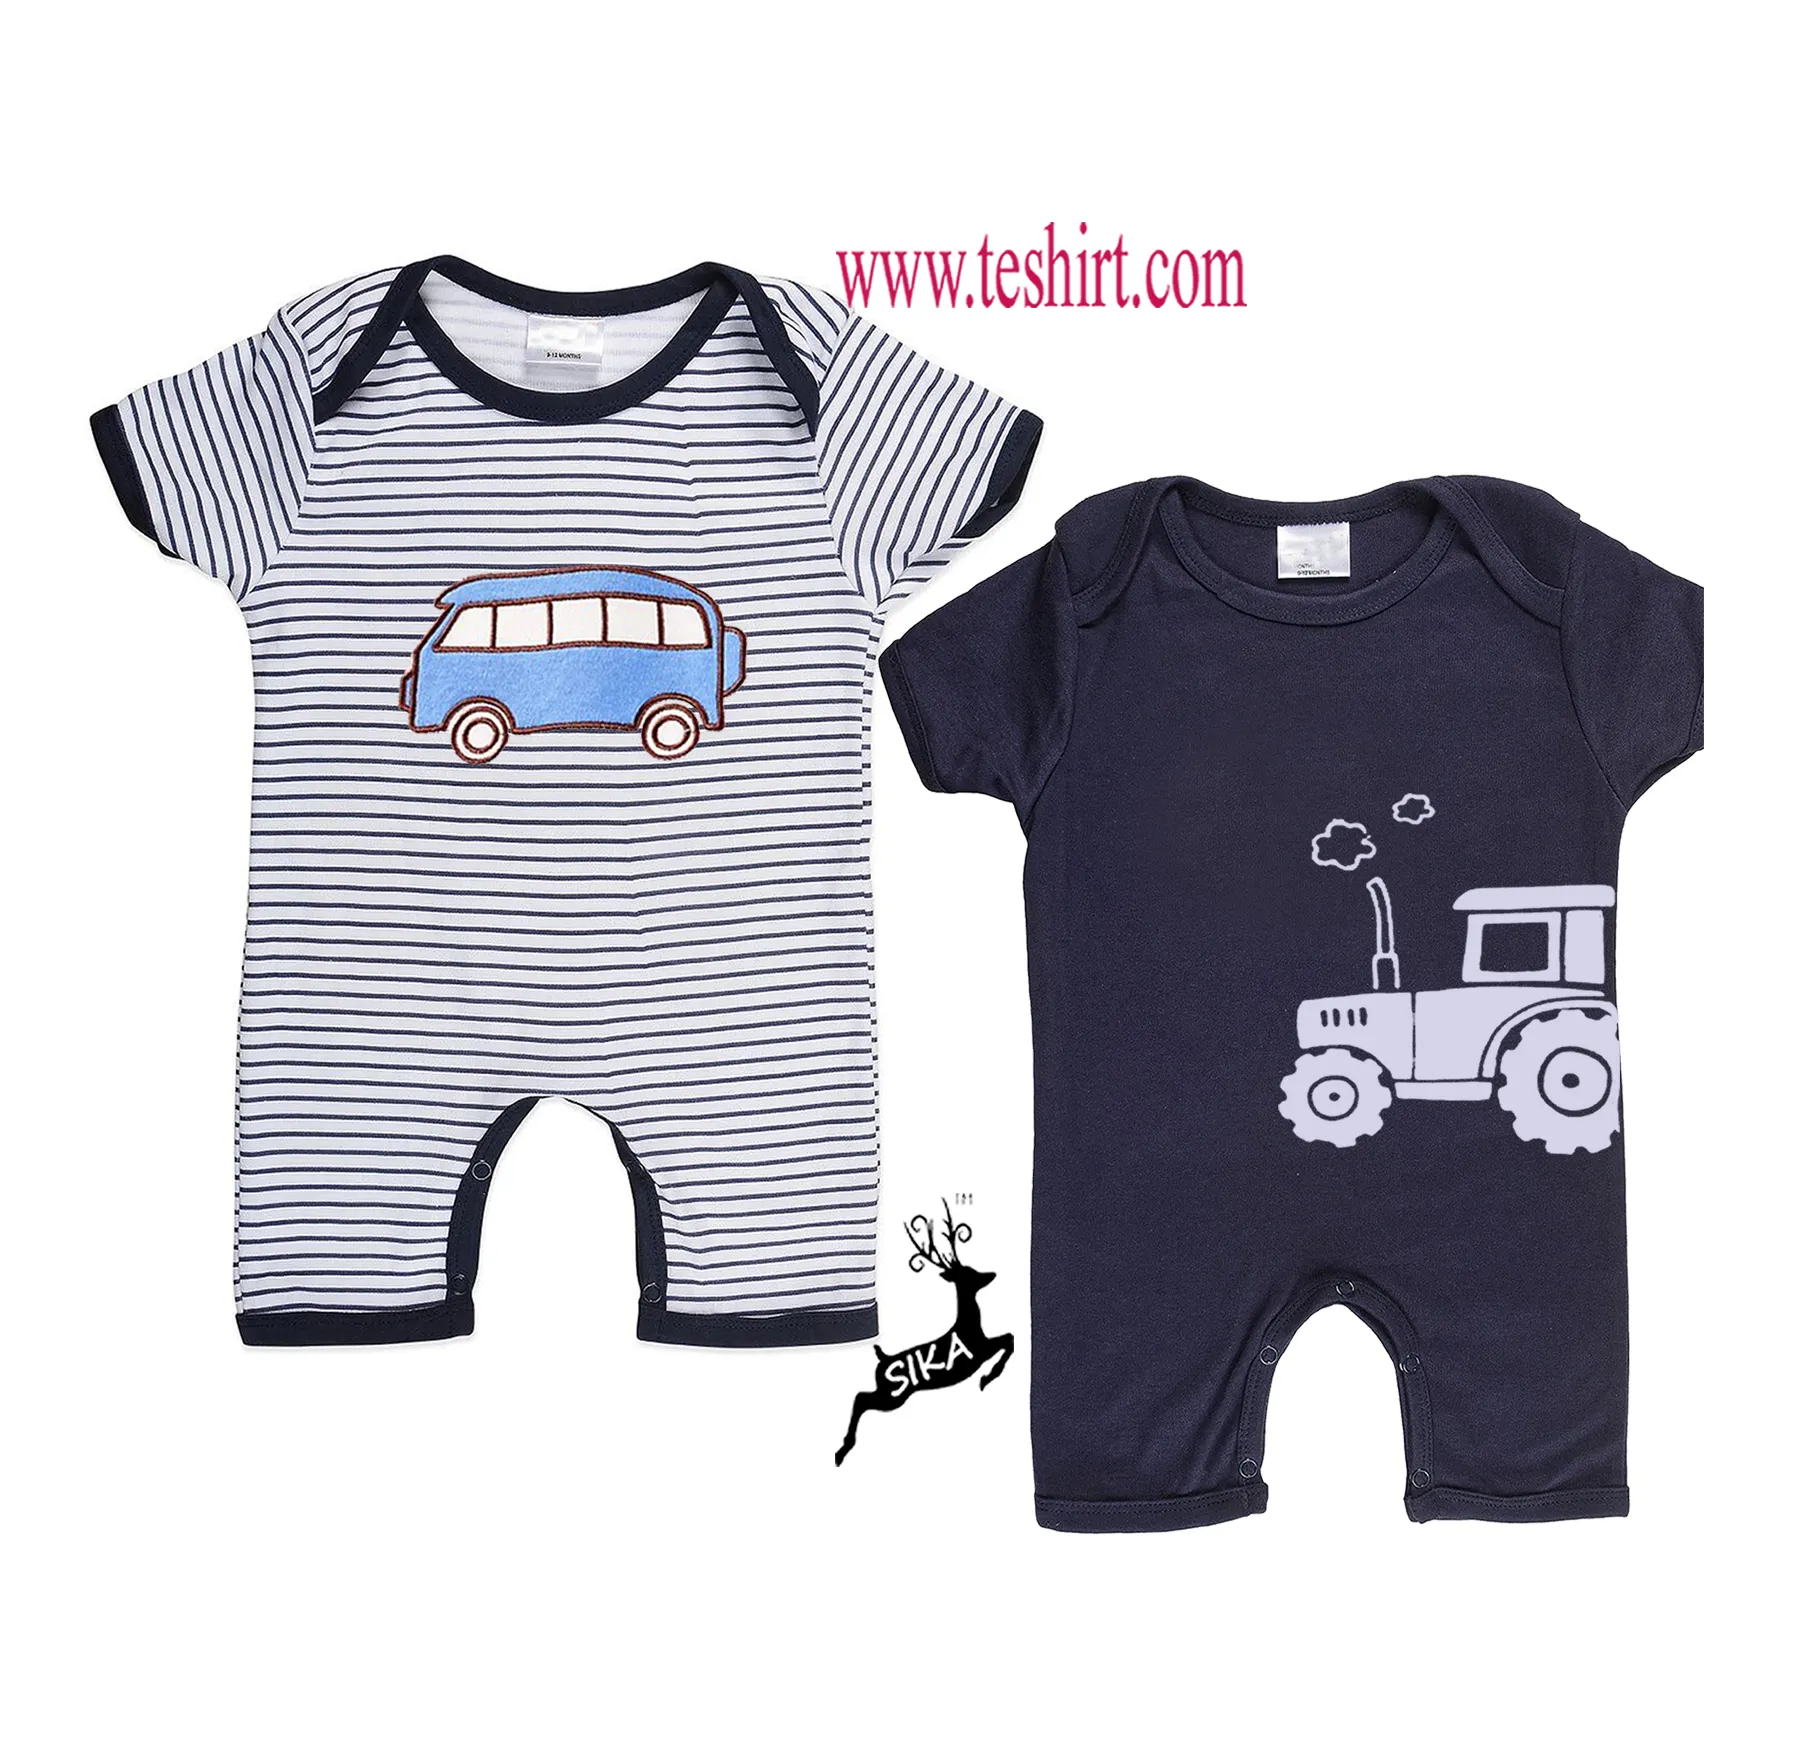 OEM /ODM custom dyed organic ocs cotton baby rompers Spring Clothes Factory Bestselling Kid Wear Stripe Design Wholesale Price